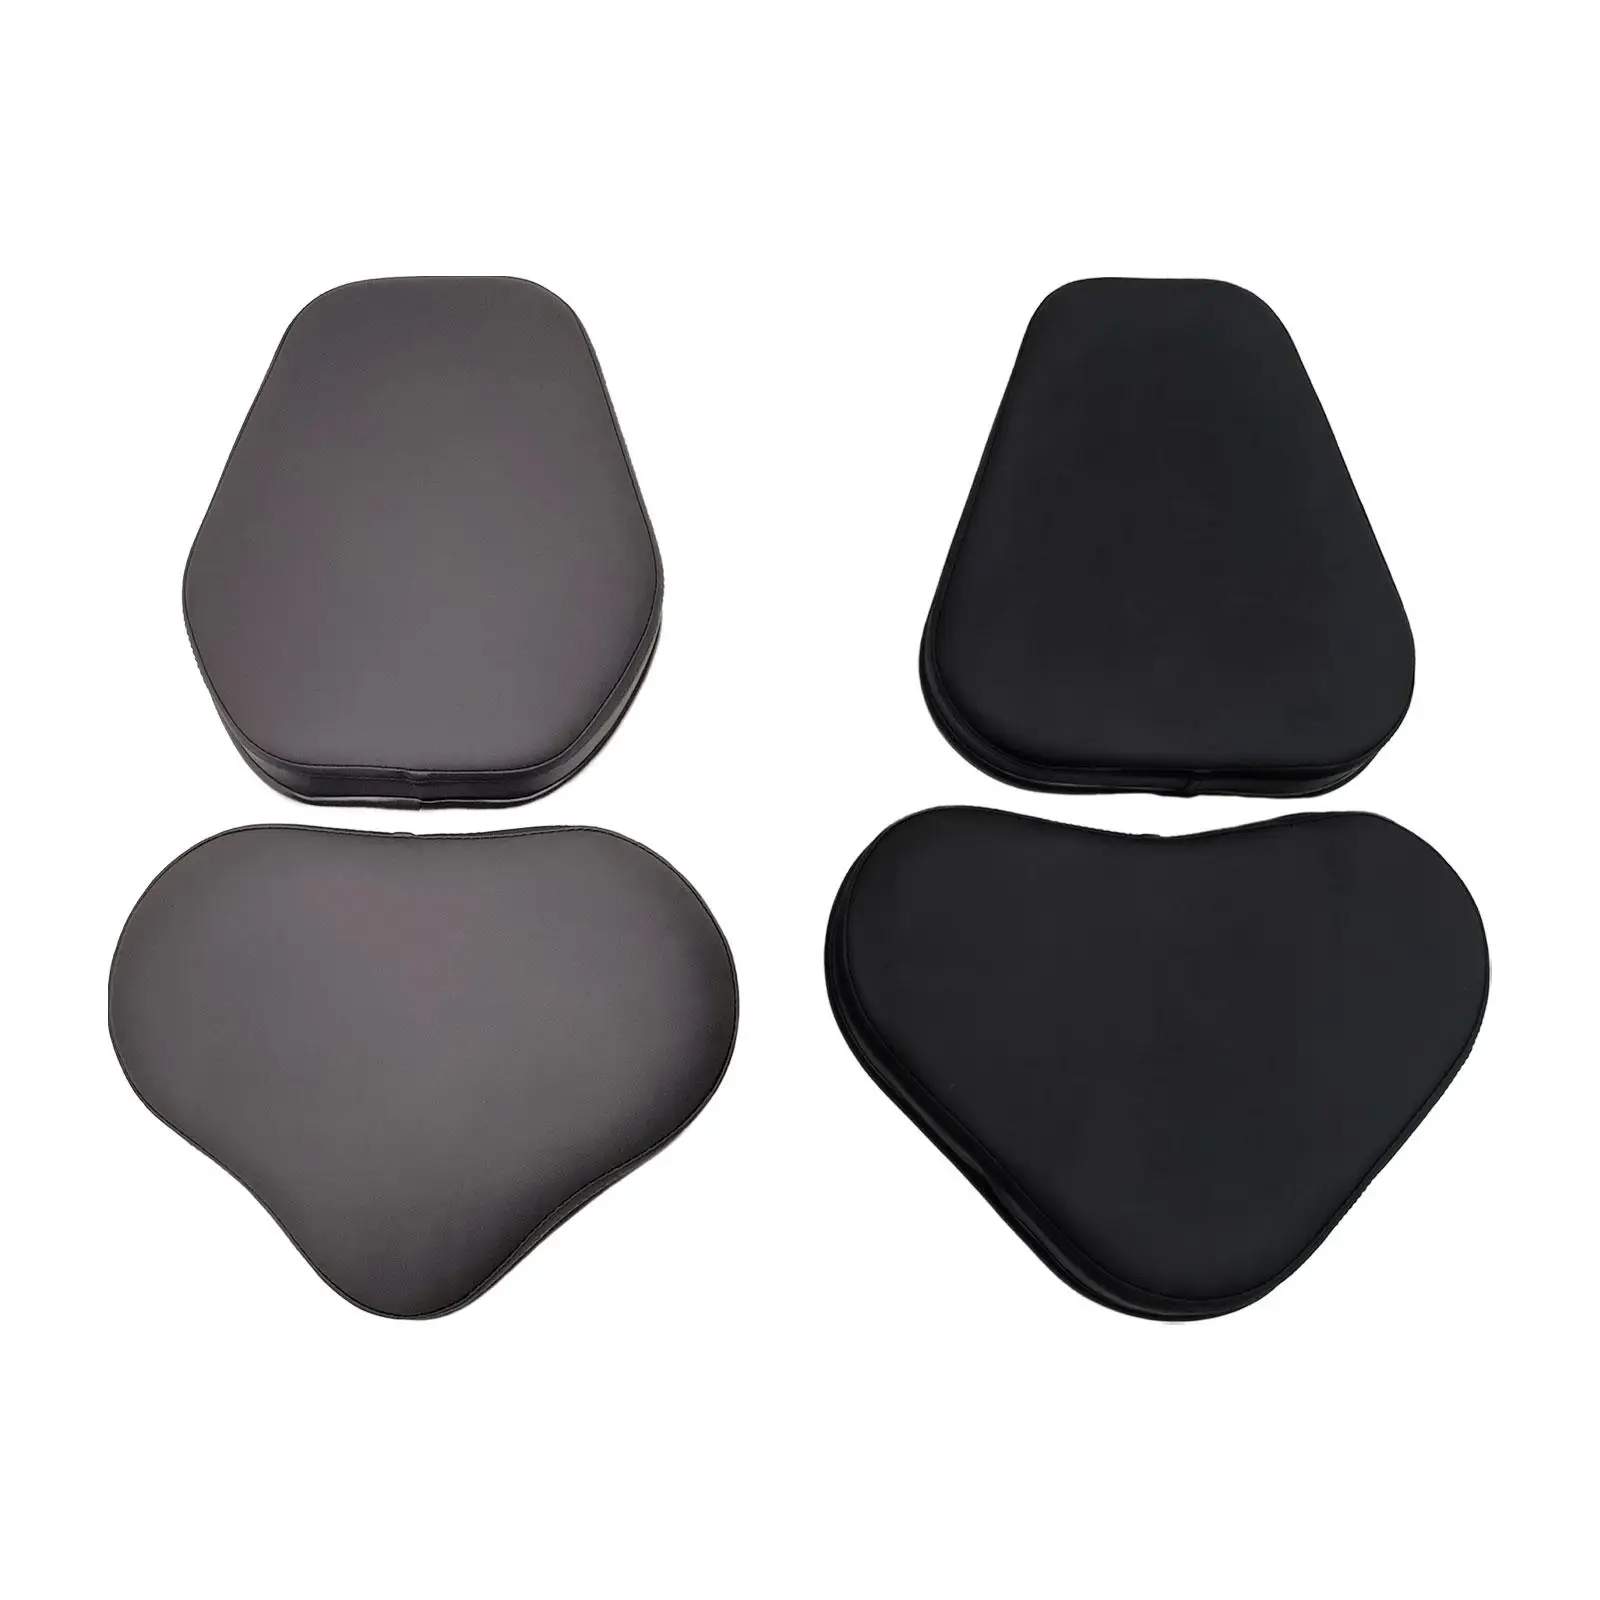 Bike Seat Cushion with Back Support Adult Saddle Cover